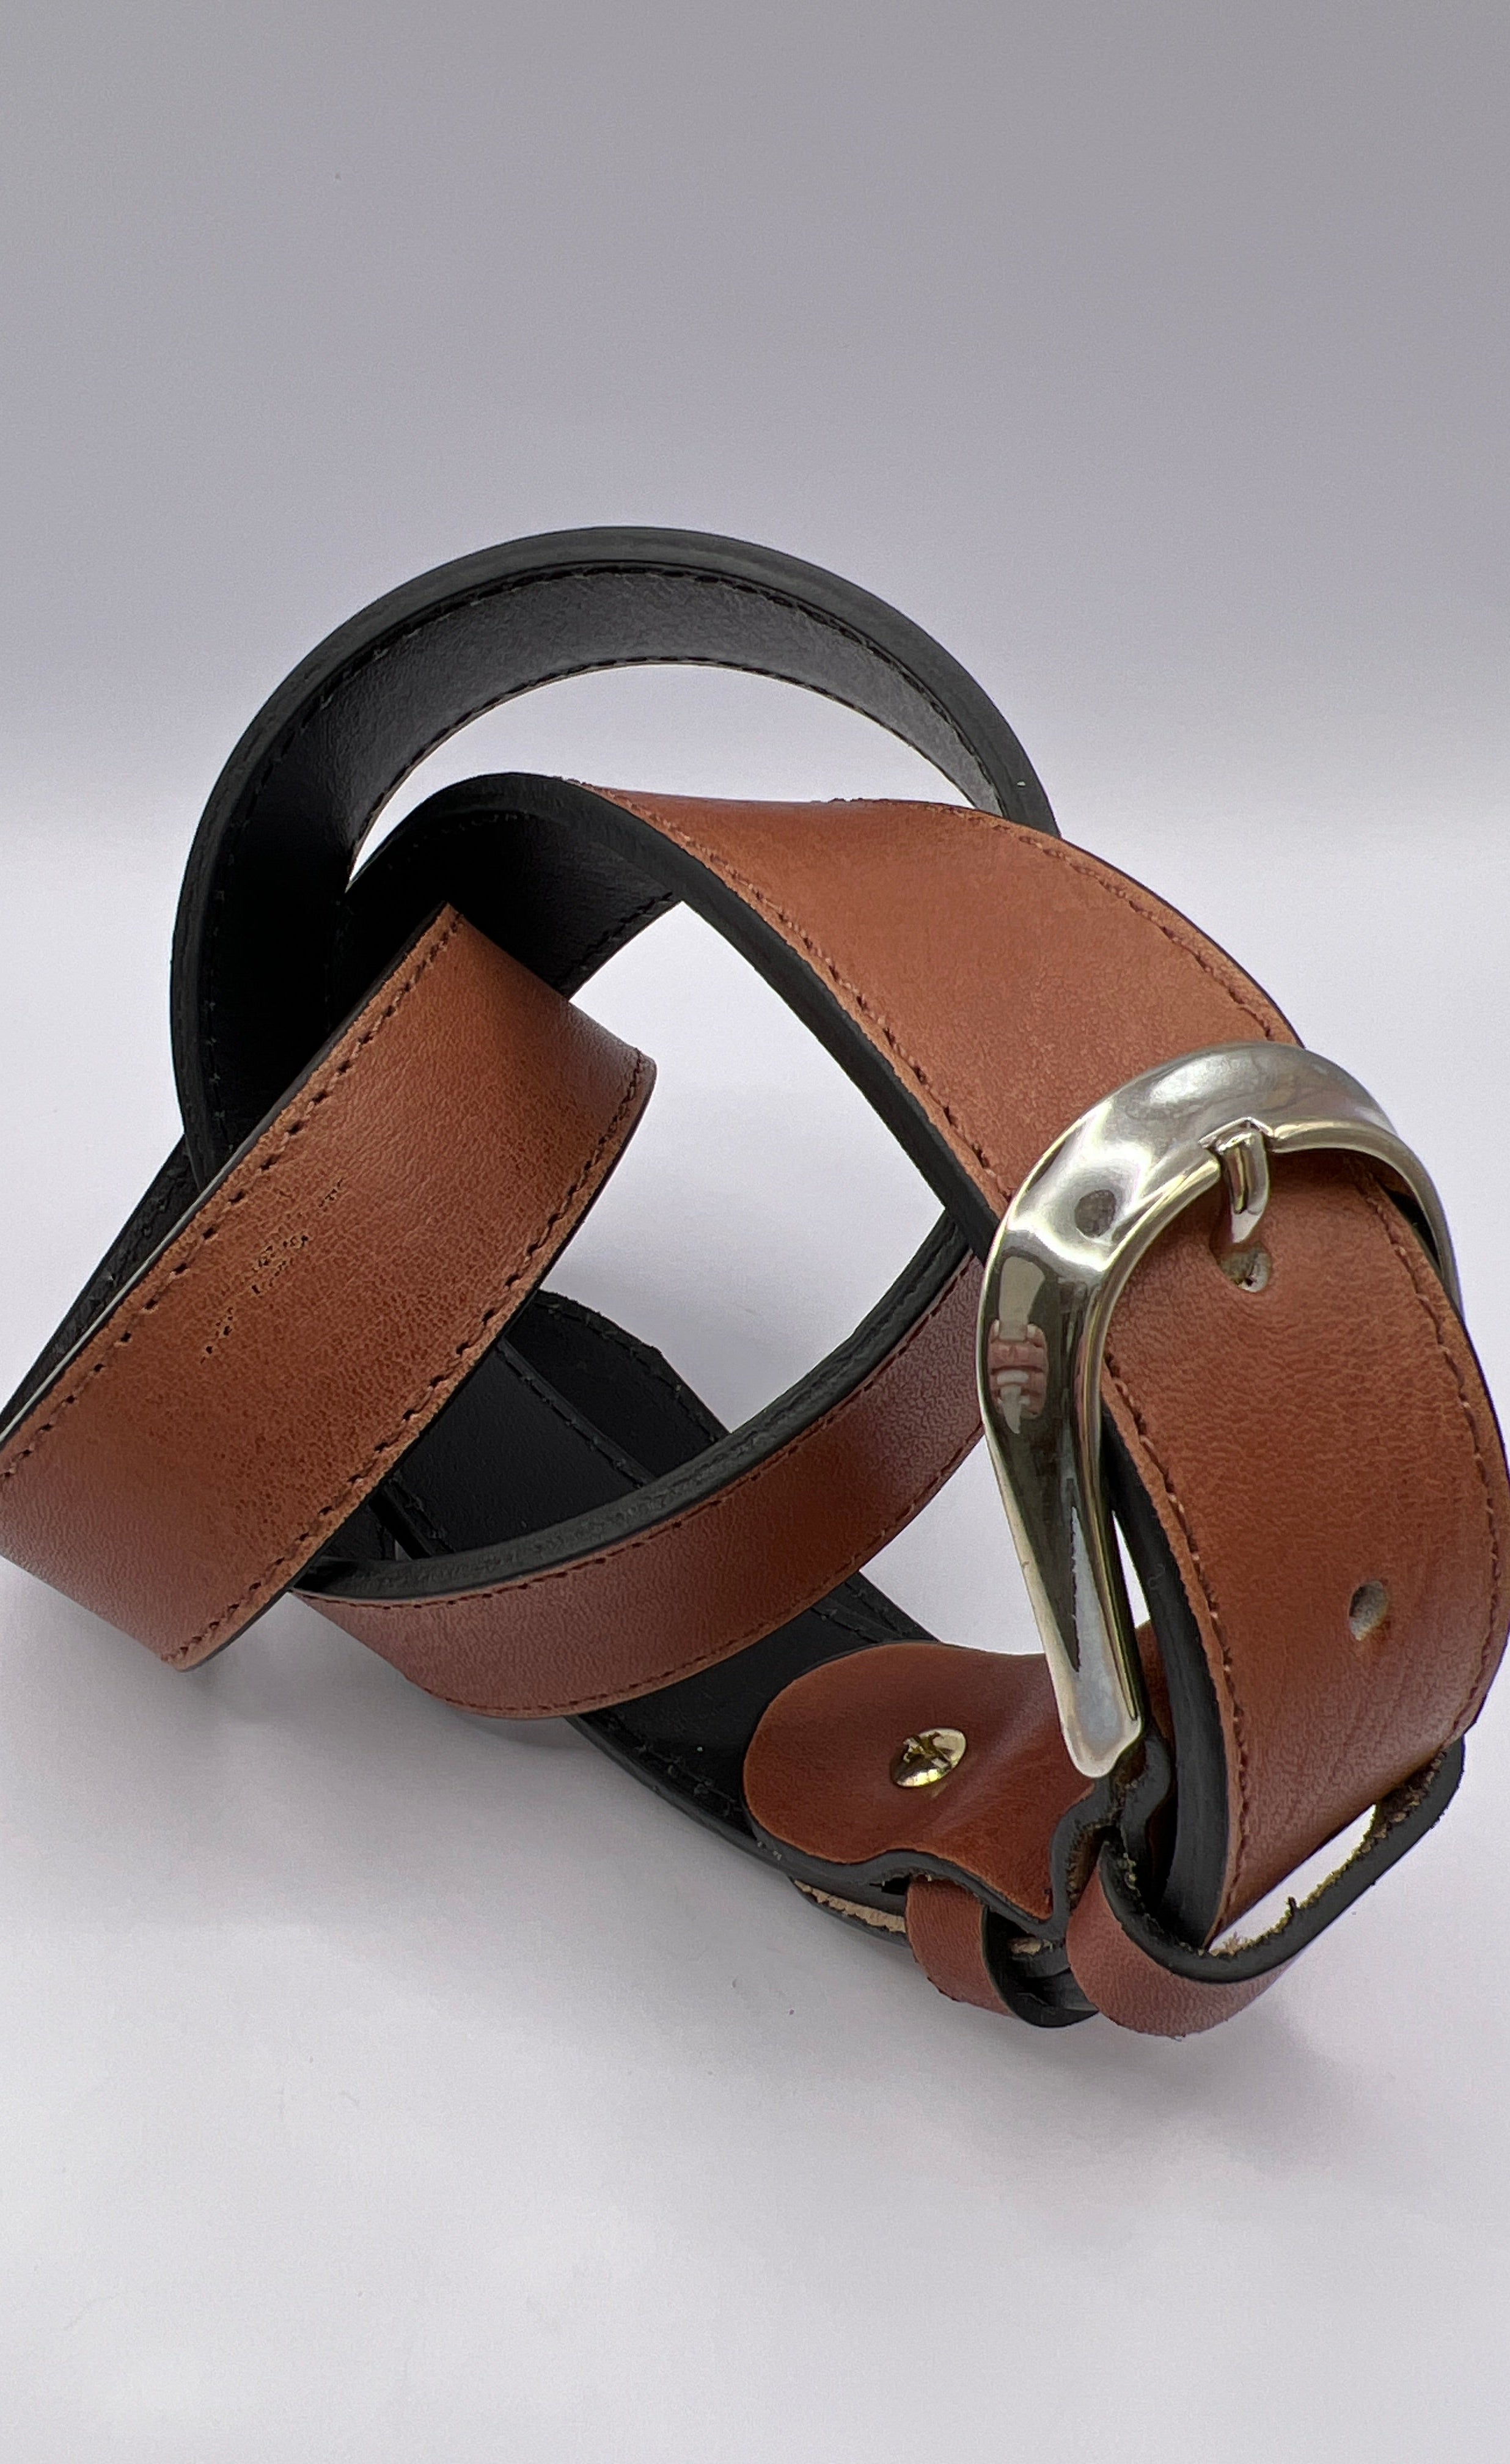 Blondish Brown Handmade Leather Belt with Silver Adornment for Women BLONDISH